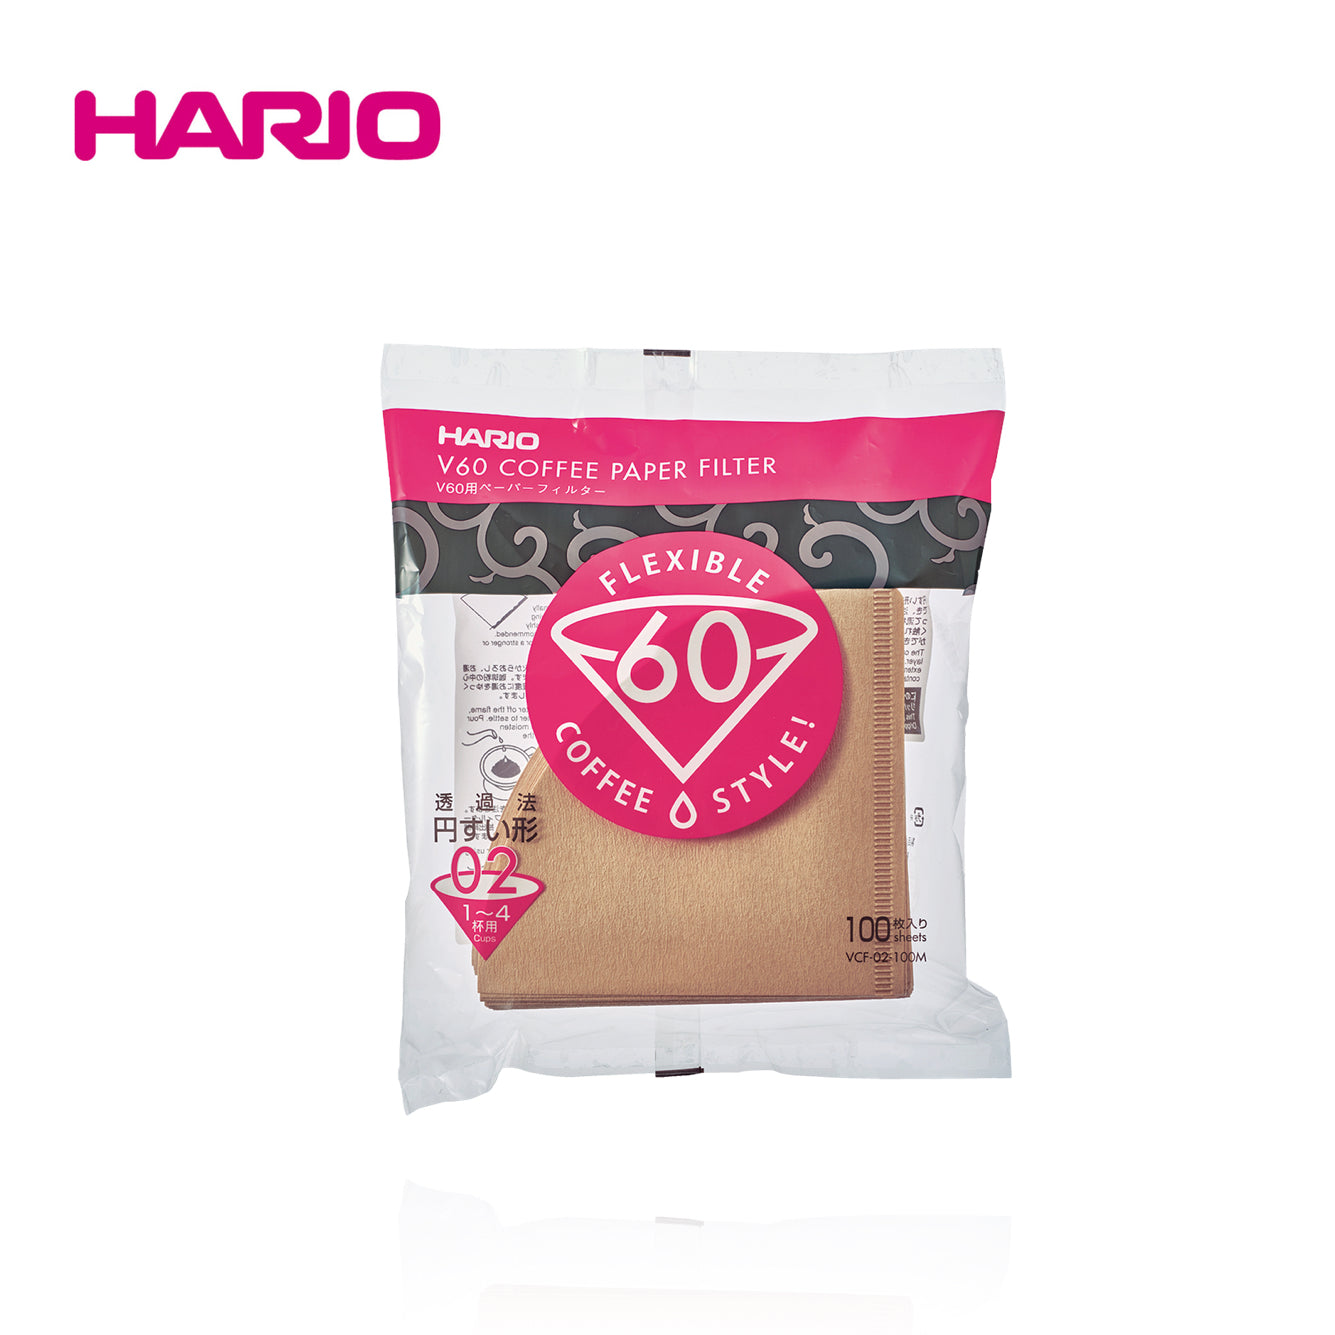 Hario V60 Coffee Paper Filter Size 2 brown